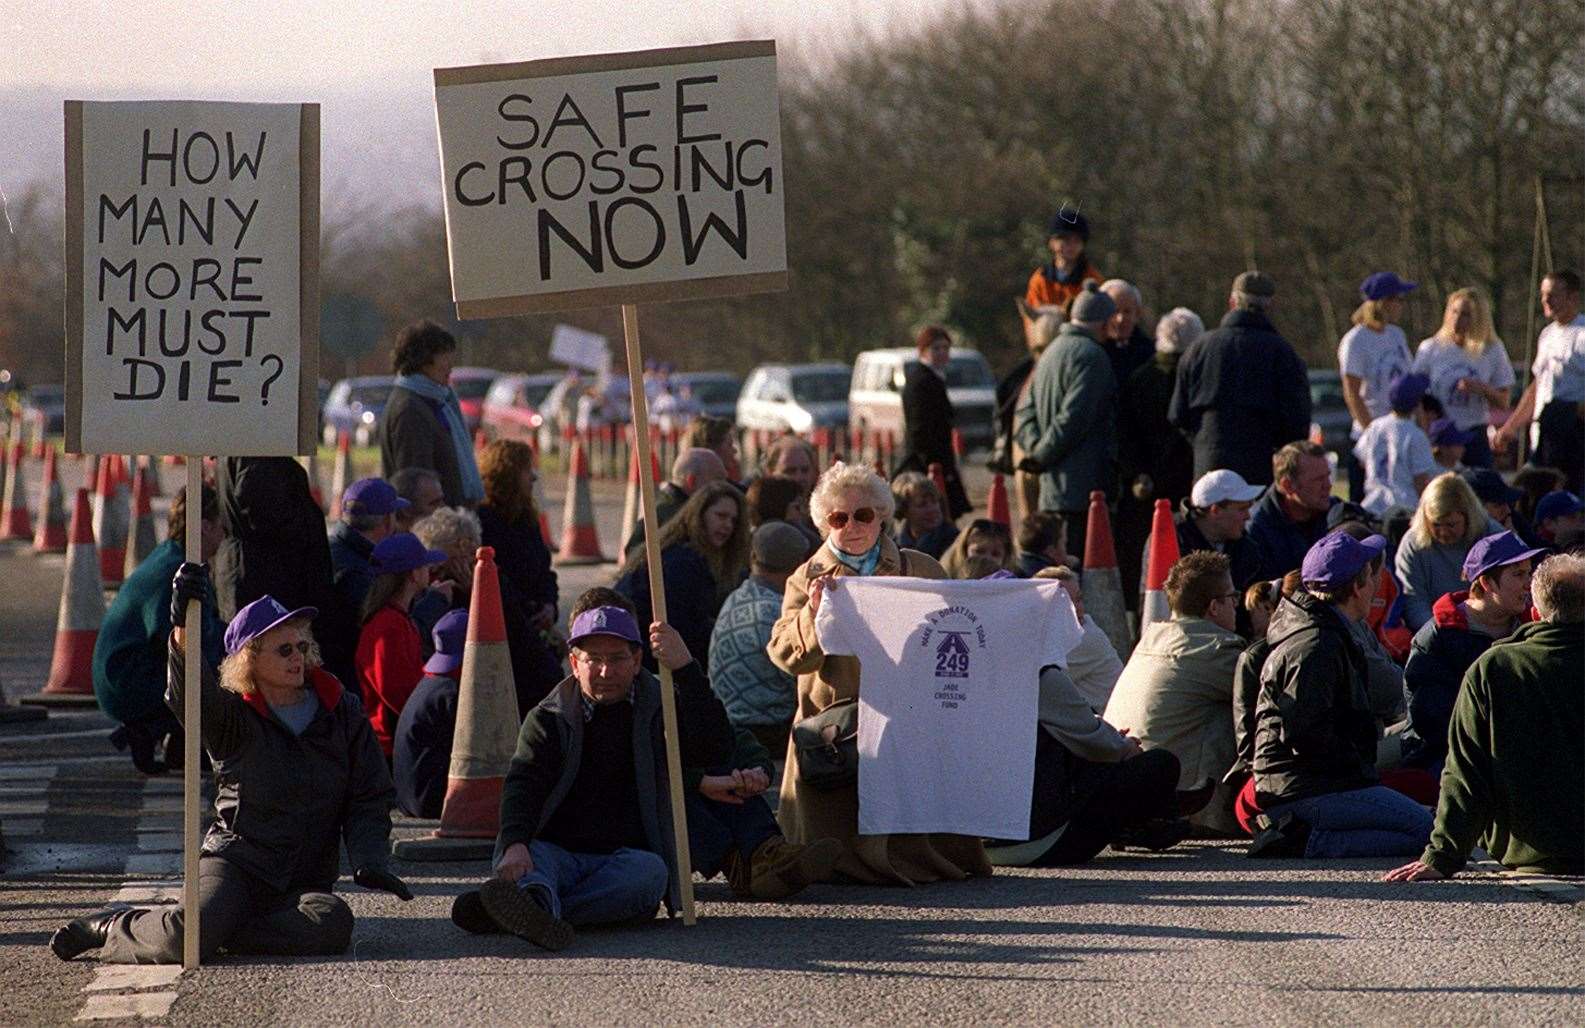 A sit-down blockade on the A249 by campaigners calling for a safe crossing on the road at Detling.